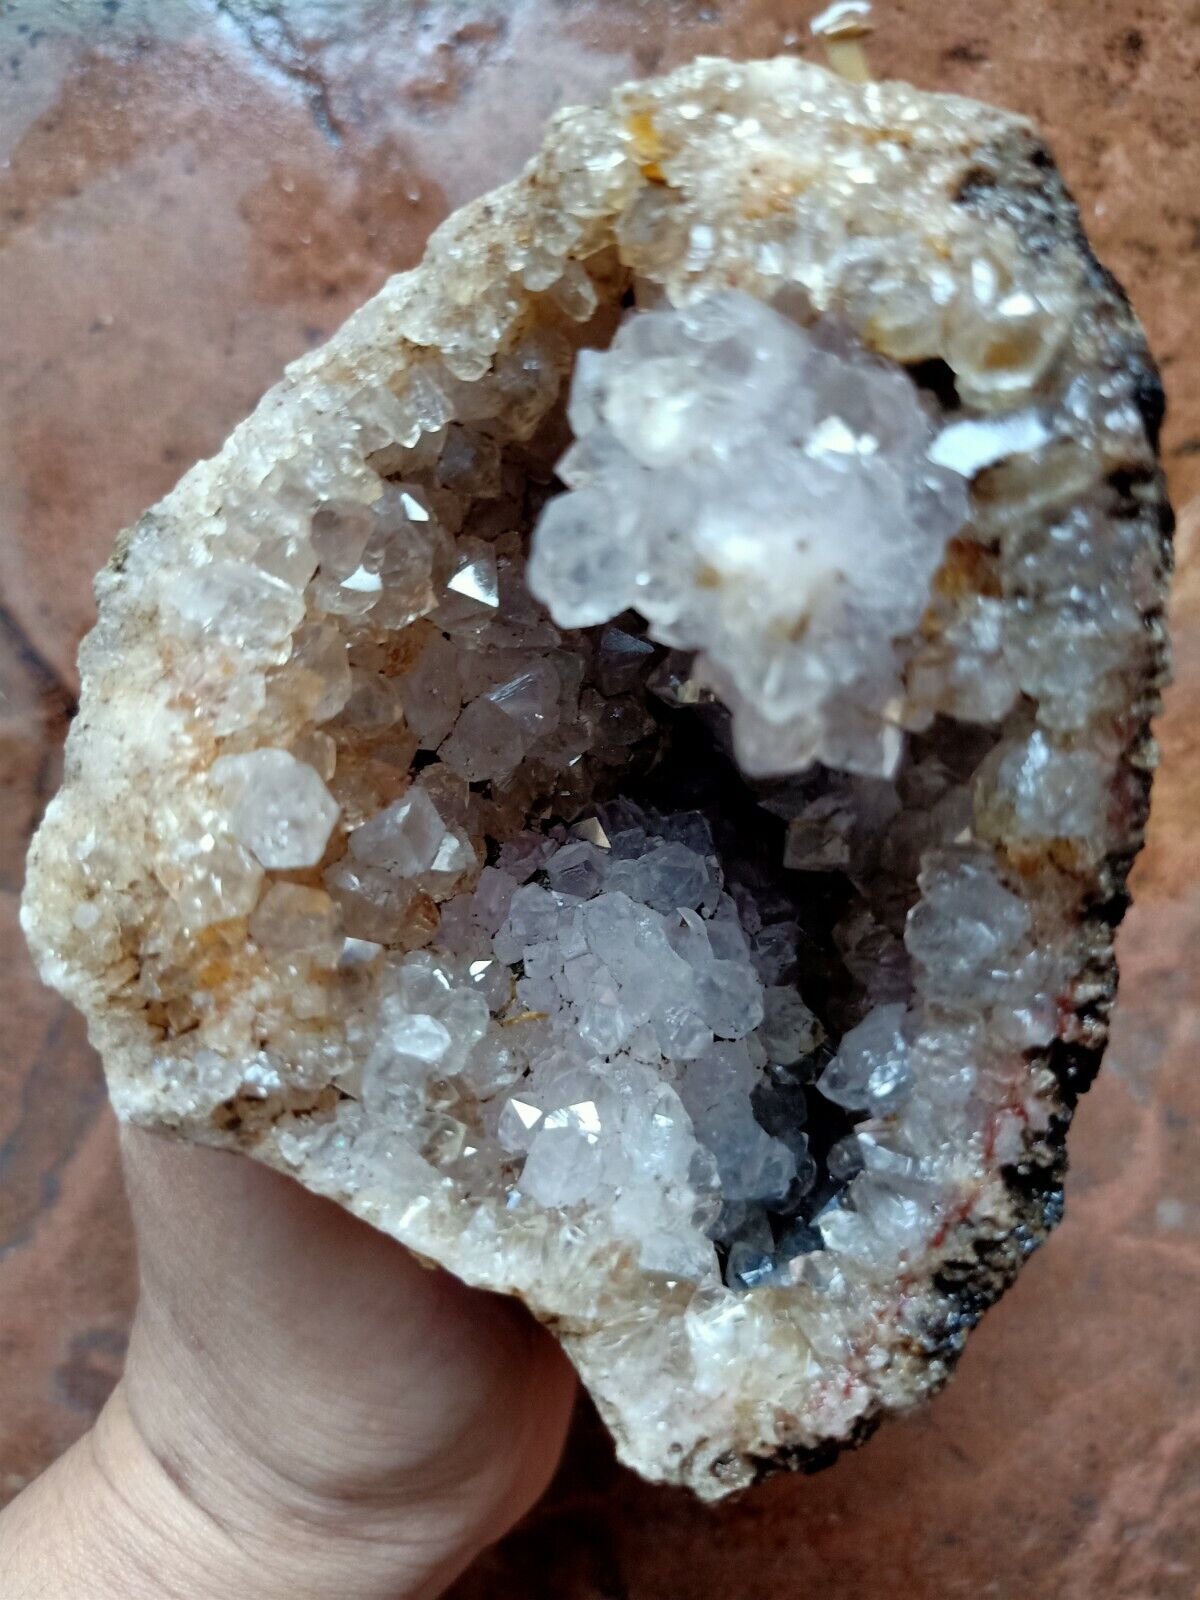 740 GRAMS CLEAR WHITE QUARTZ CRYSTAL CLUSTER NATURAL SPECIMEN FROM INDONESIA